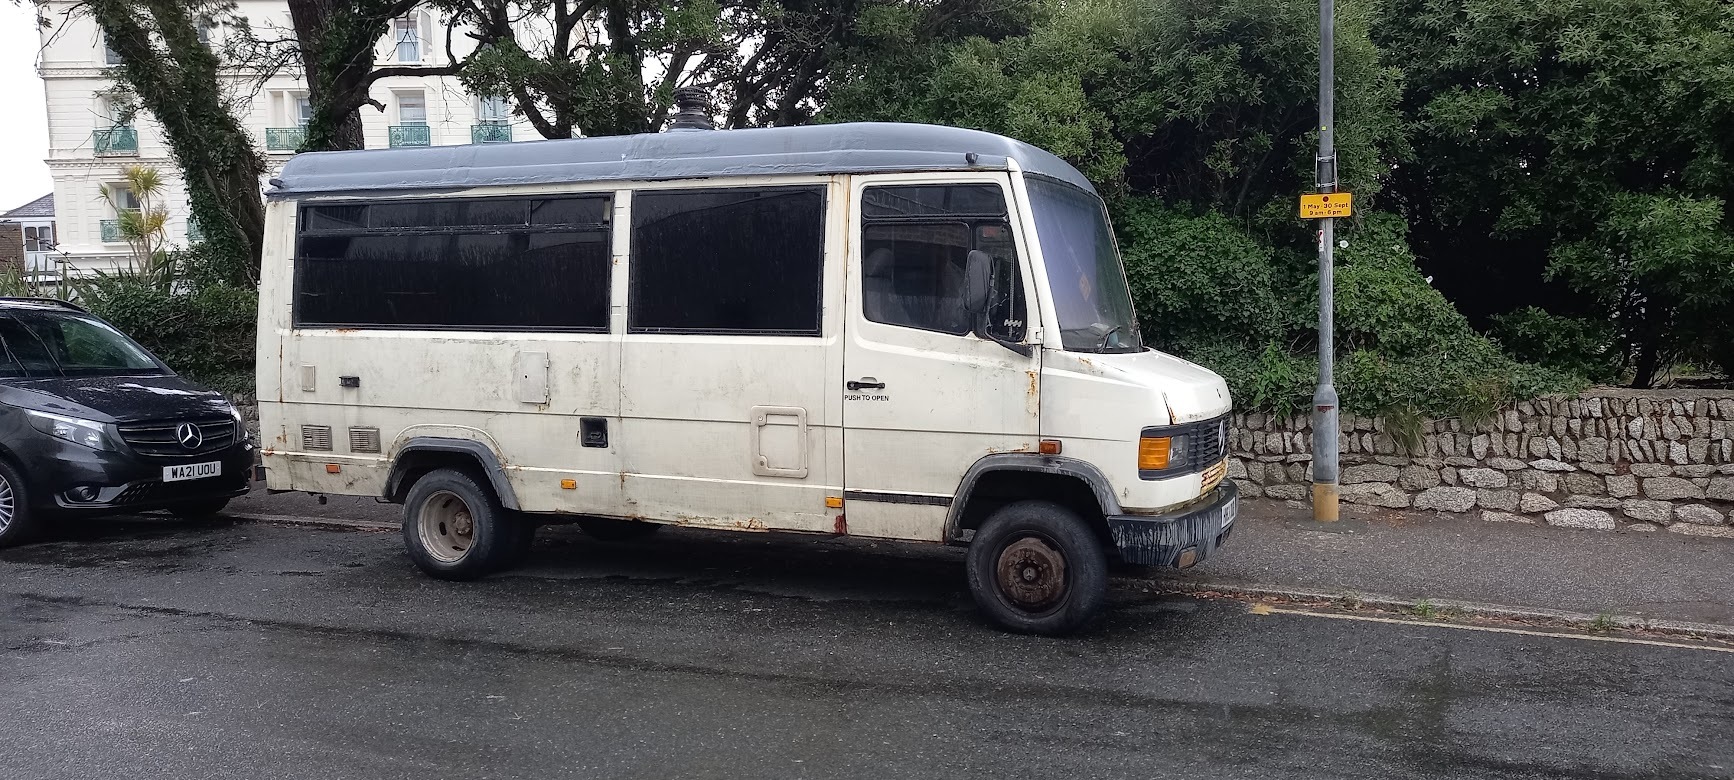 This van appeared to have been abandoned 